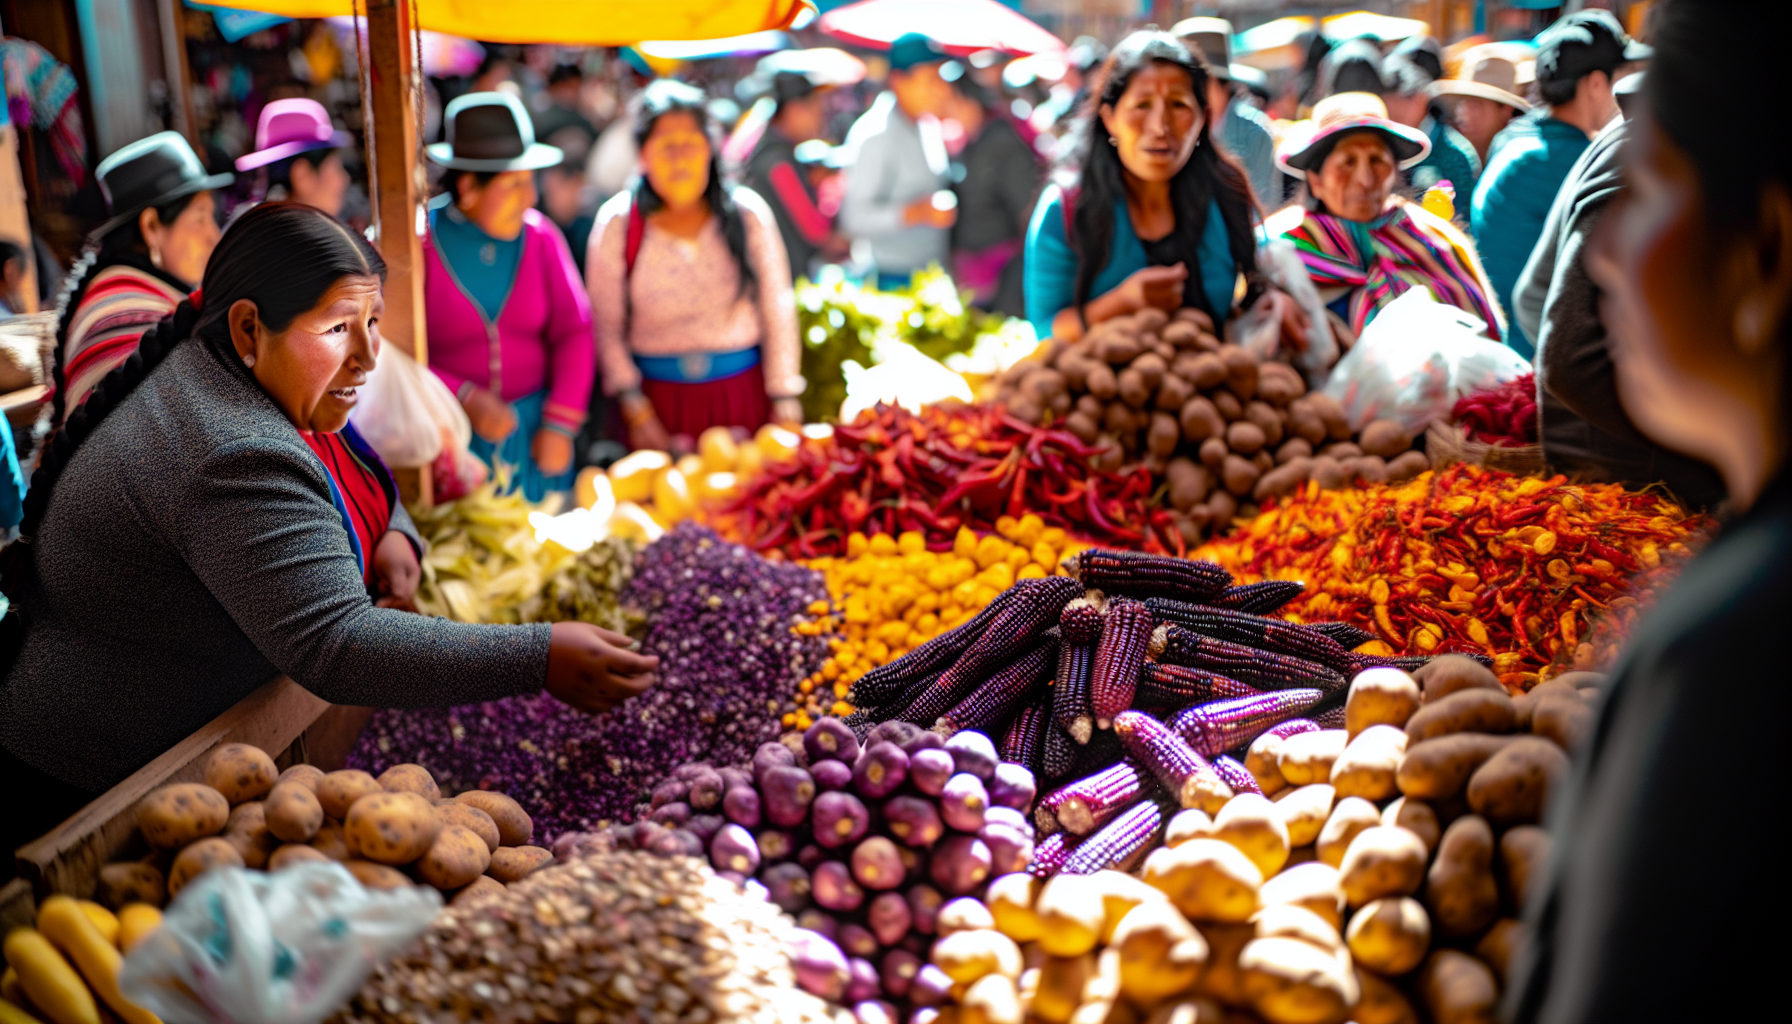 A vibrant display of Peruvian ingredients at a local market